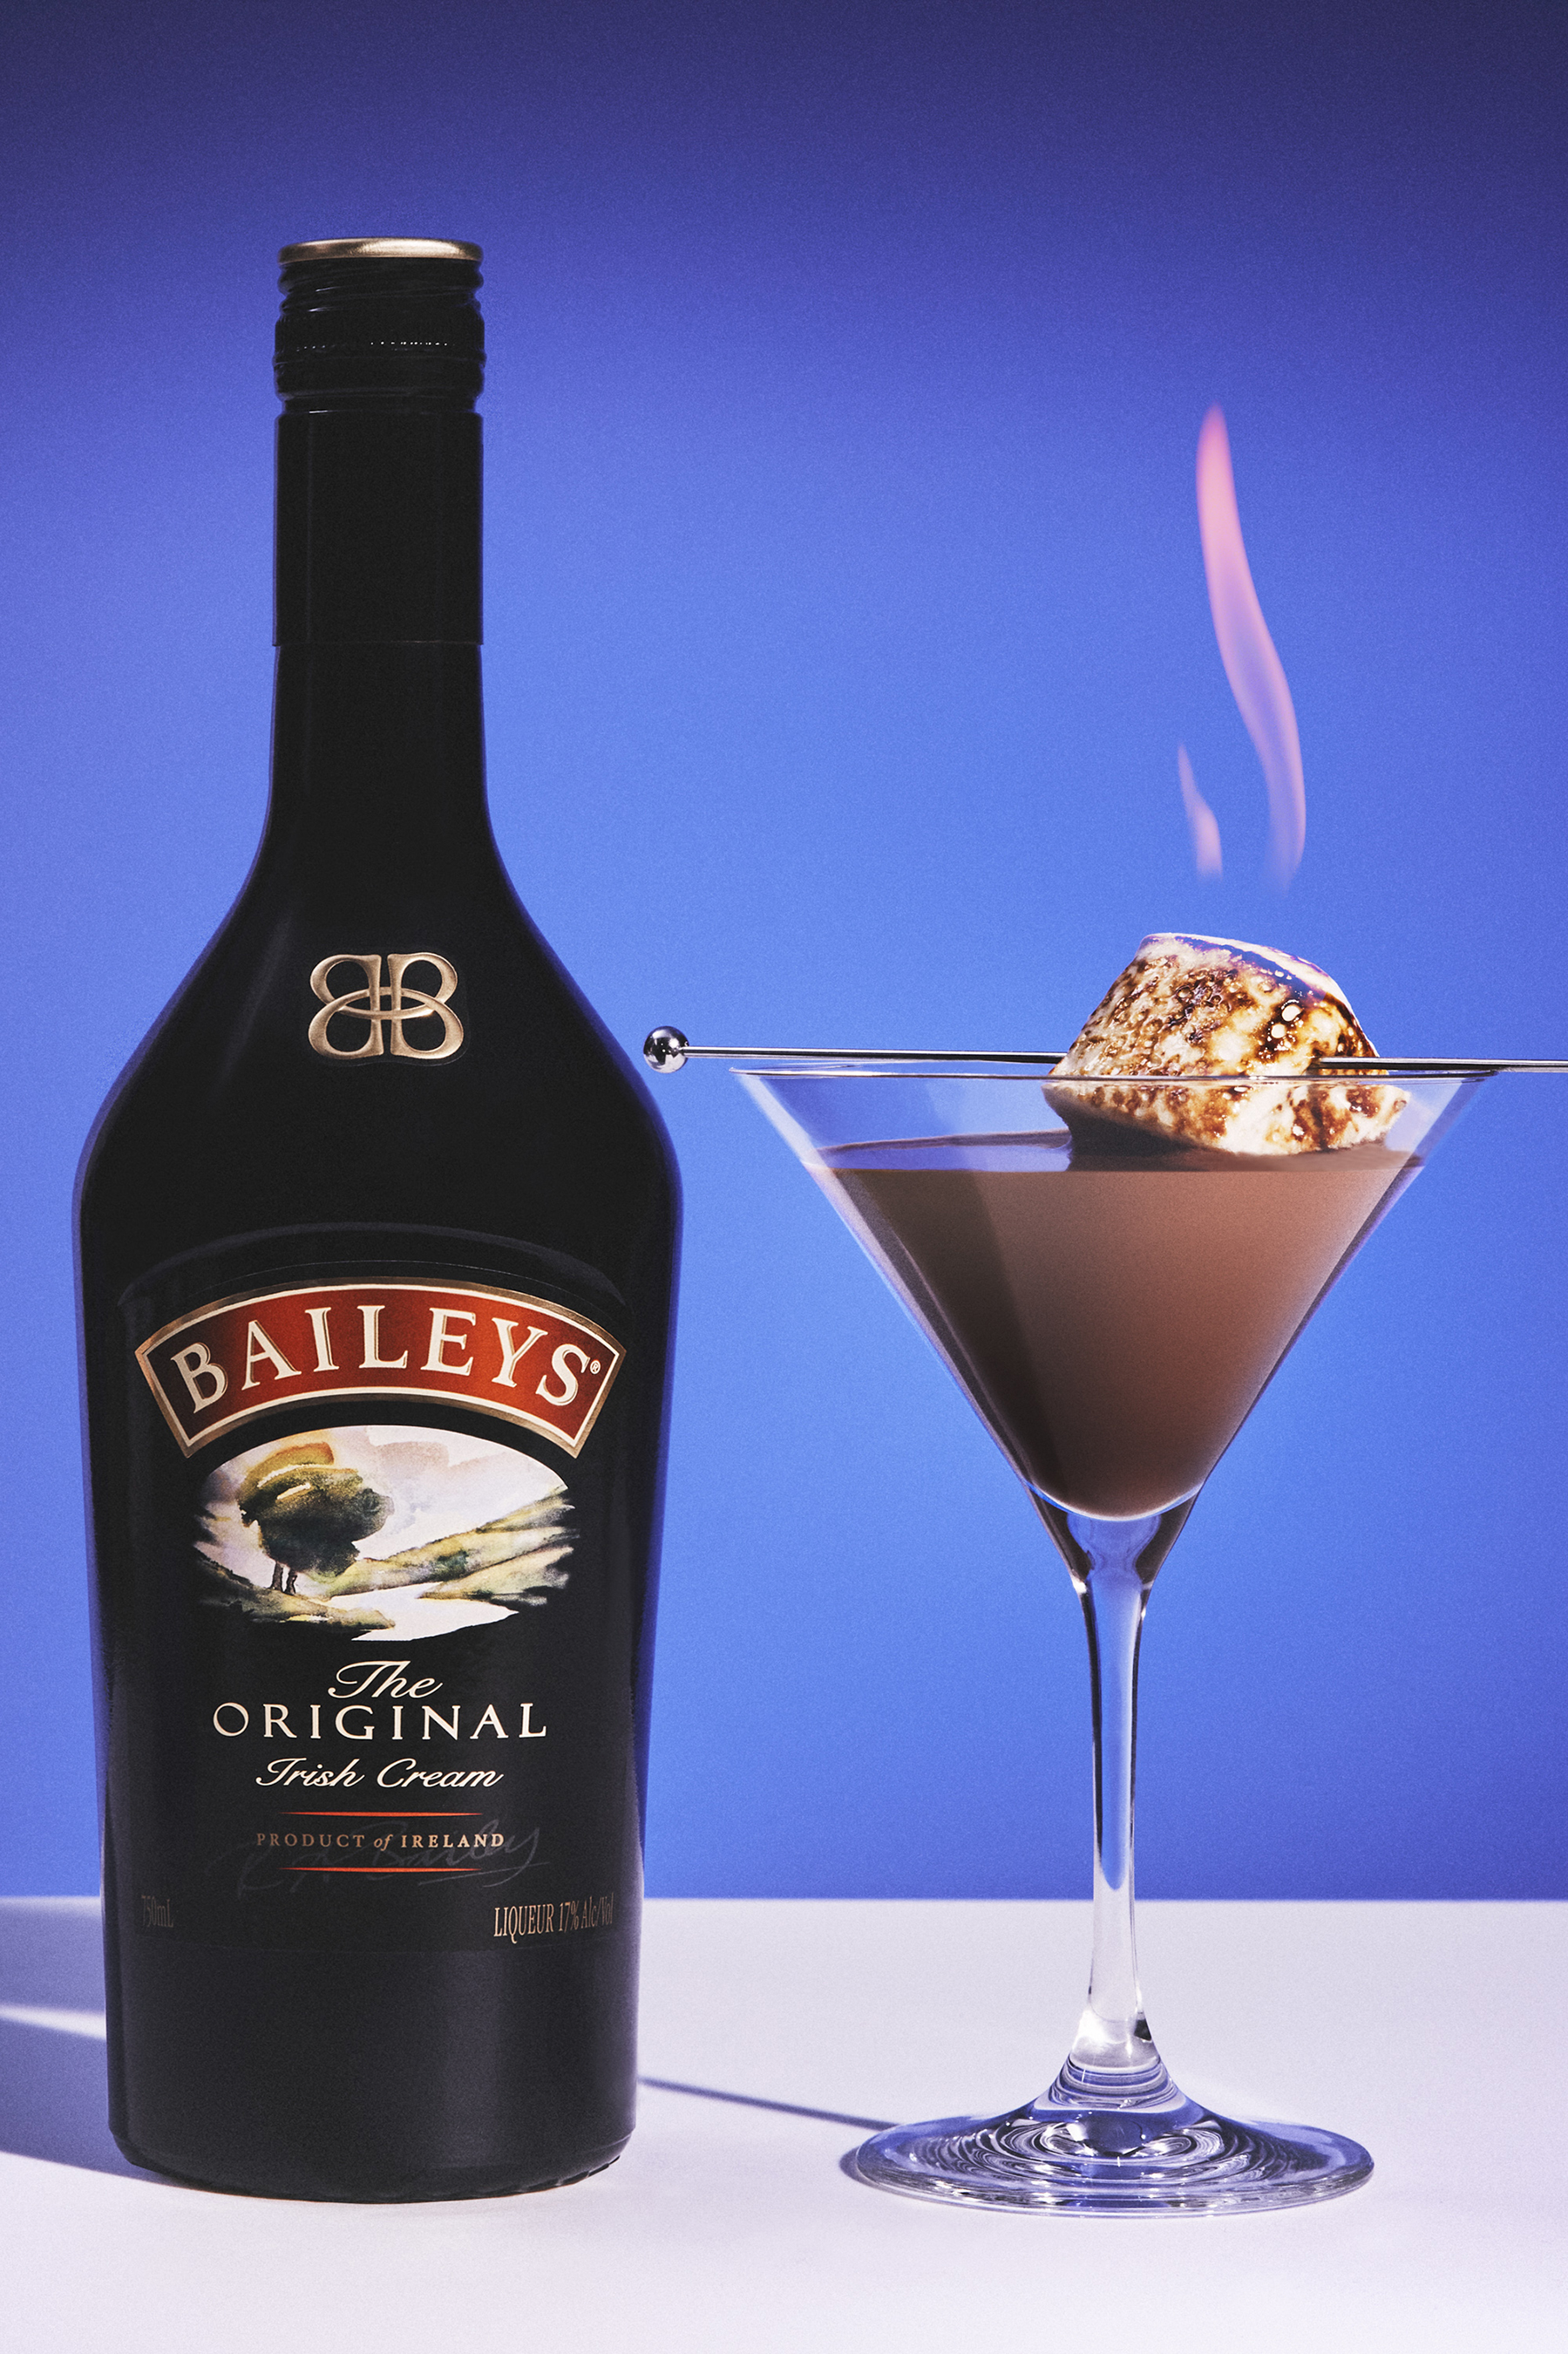 Treat yourself with a signature Baileys Martini this winter season!